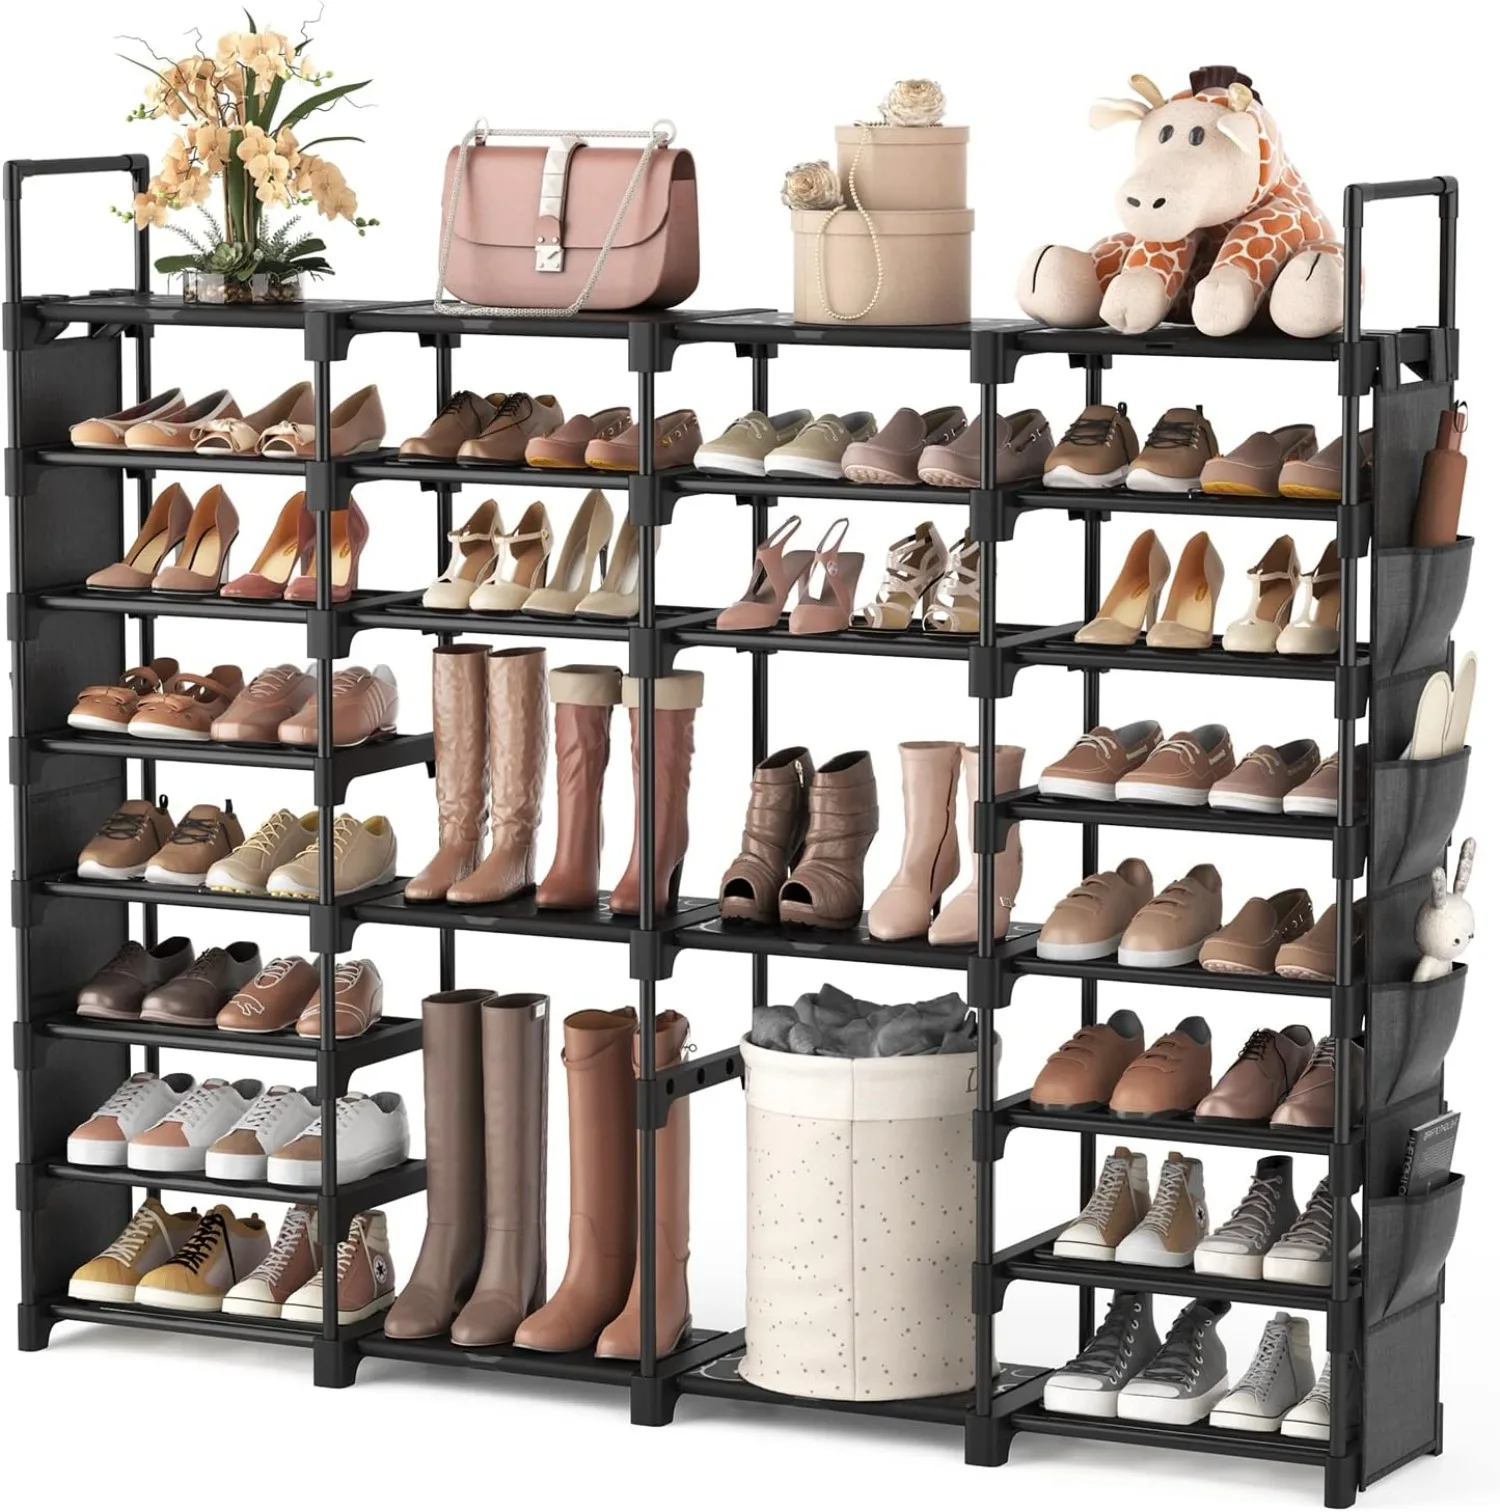 

Large Shoe Rack Organizer Tall Metal Rack Holds 62-66 Pairs 8 Levels Space-saving Shoe Rack Storage with Side Hanging Pockets